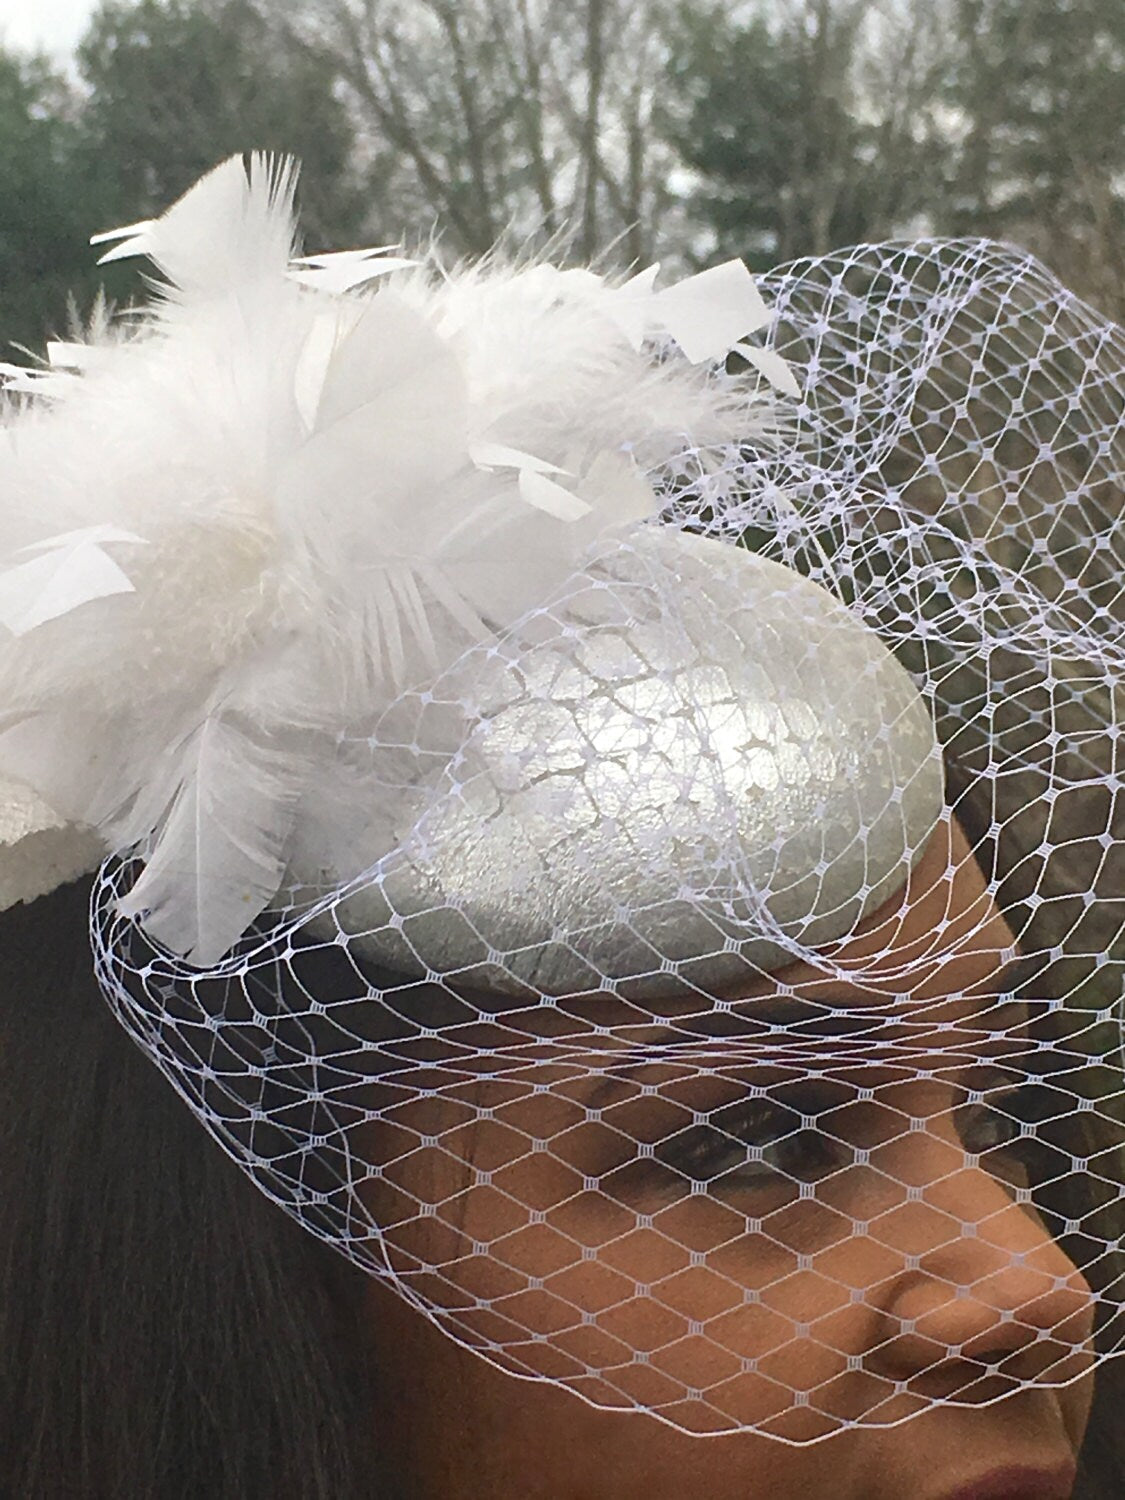 Silver metallic Leather Croc Embossed Fascinator with White Feather Cluster and White veiling- Bridal Headpiece-Wedding-Races Hat-Prom-Party